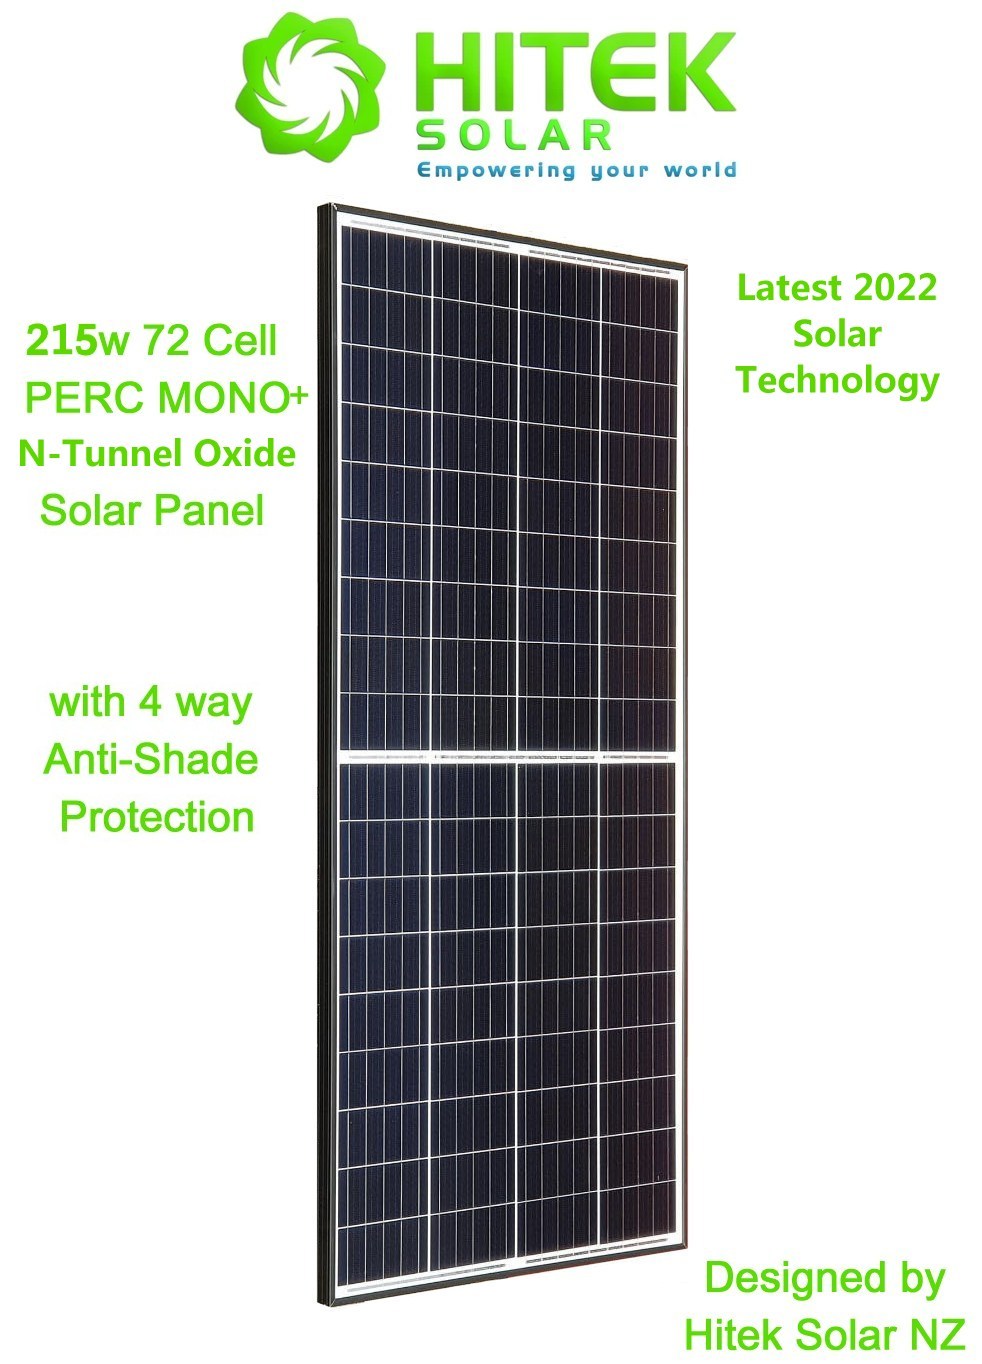 215w PERC MONO+N-TO Solar Panel (4 Way Anti-Shading Protection) - Latest Solar Technology for 2022